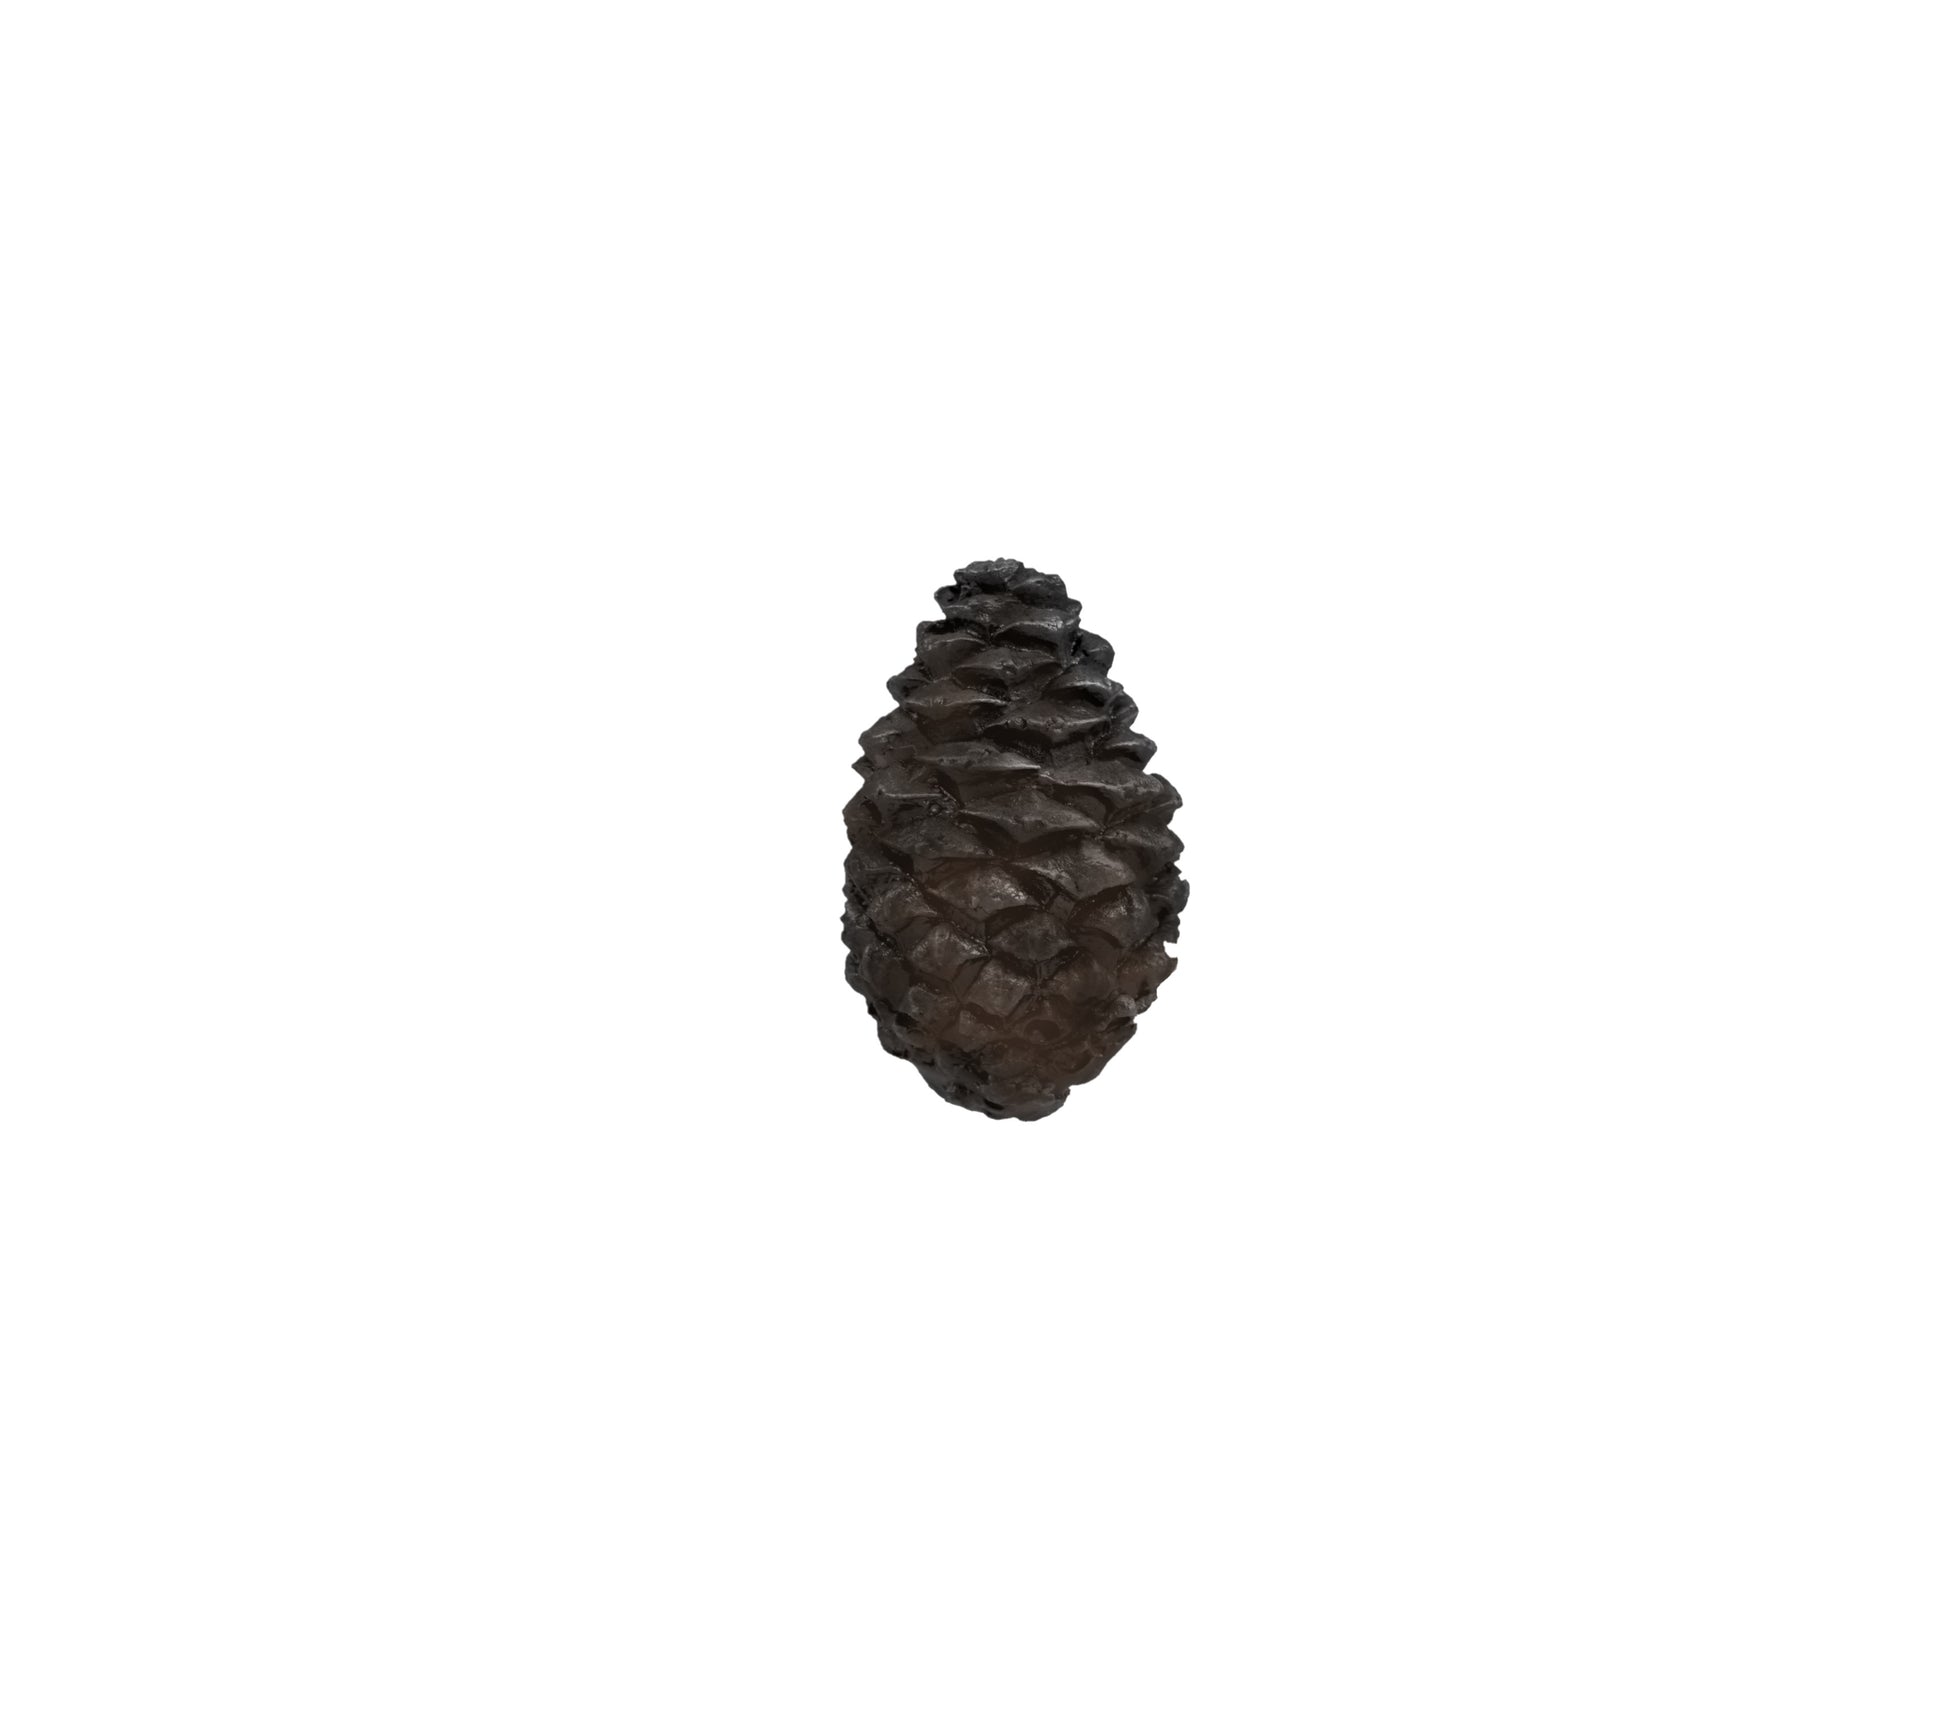 Solid Bronze cabinet knob is a lodgepole pine cone